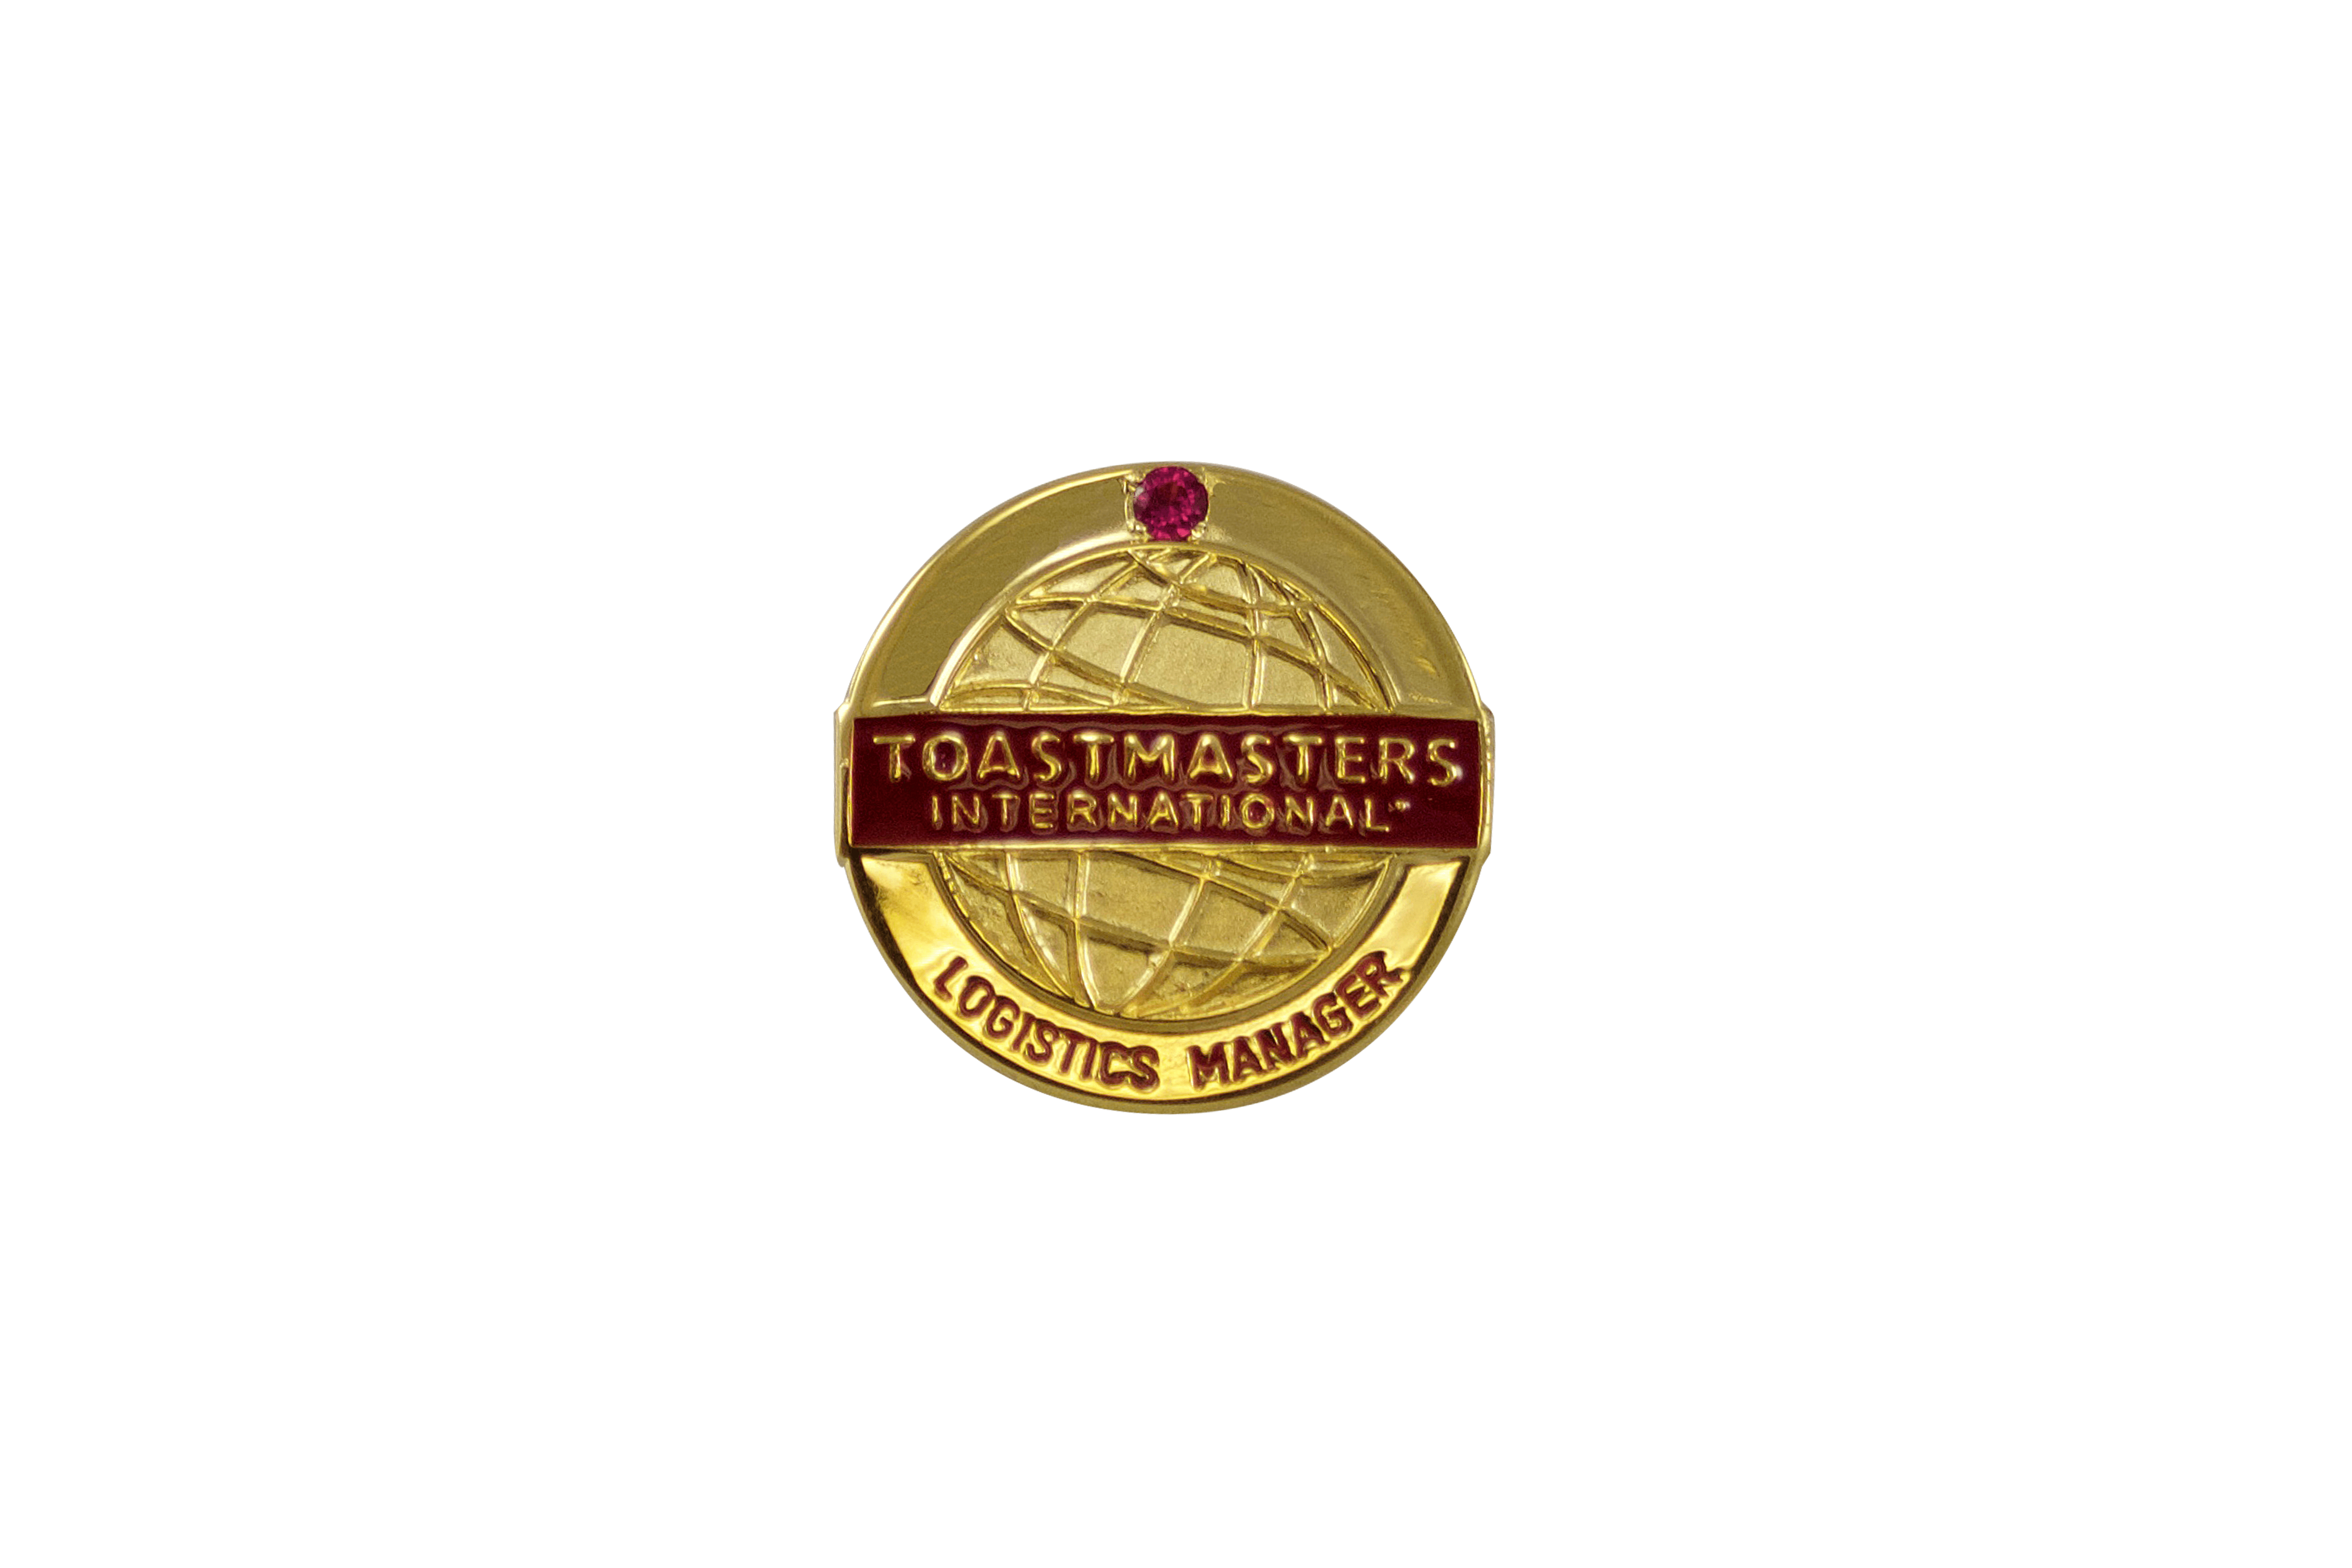 Logistics Manager Pin (with stone)